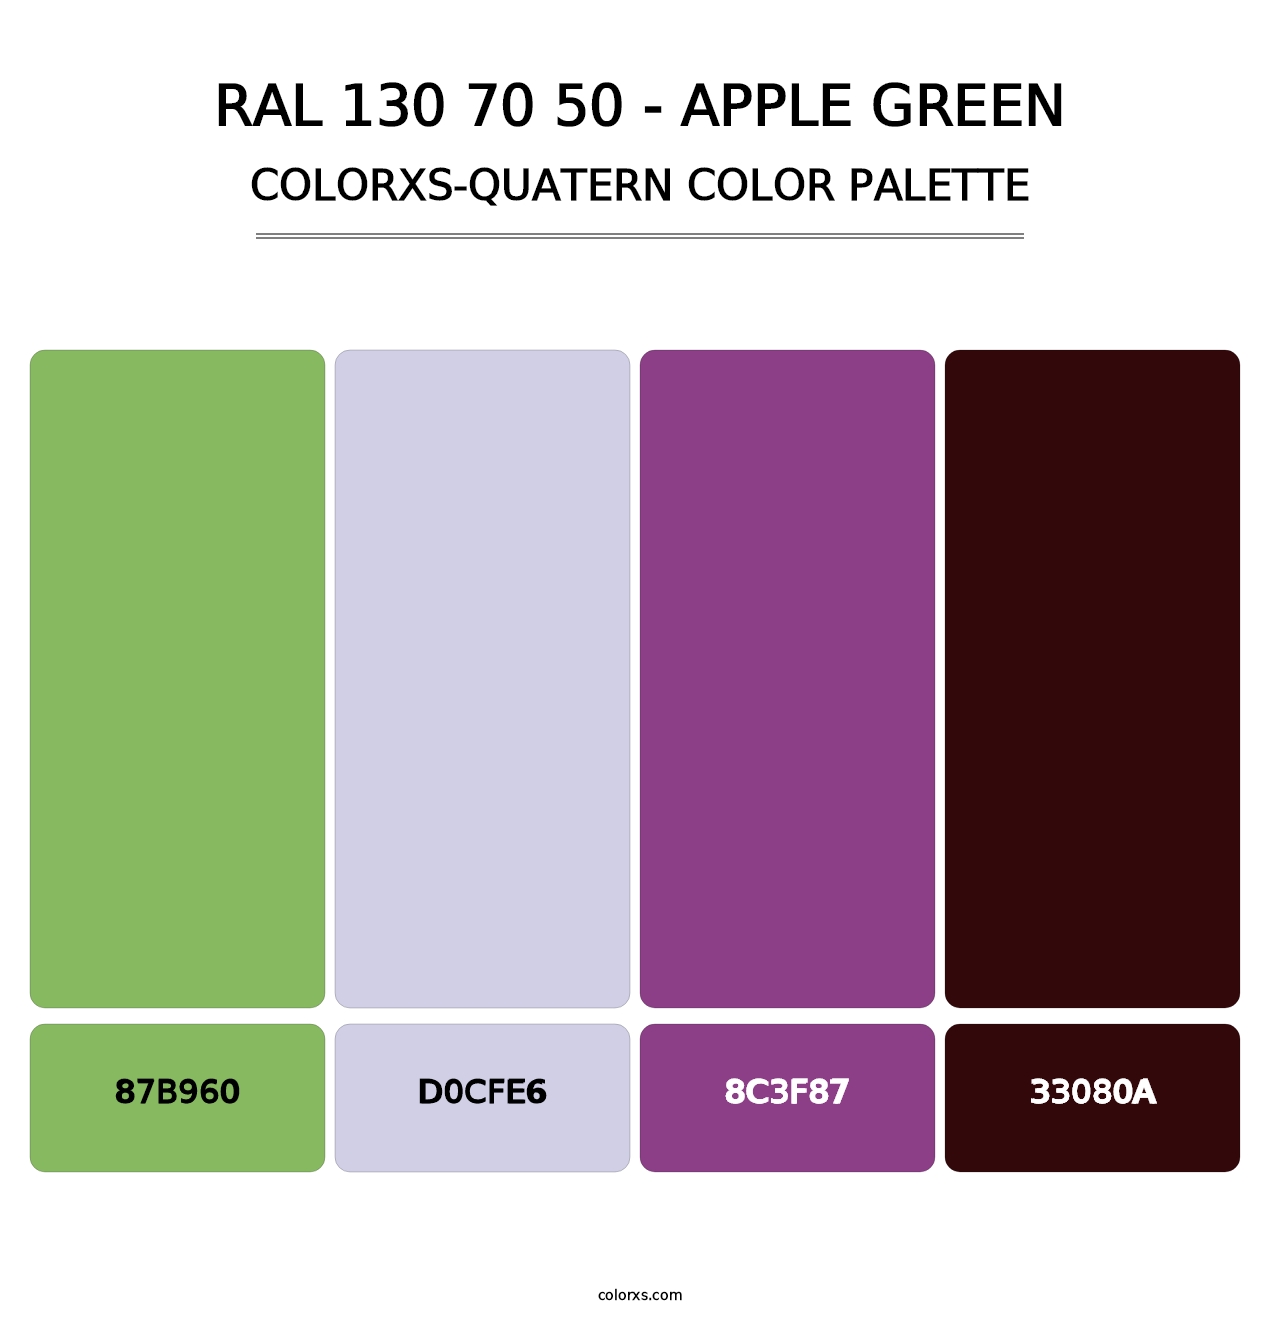 RAL 130 70 50 - Apple Green - Colorxs Quatern Palette